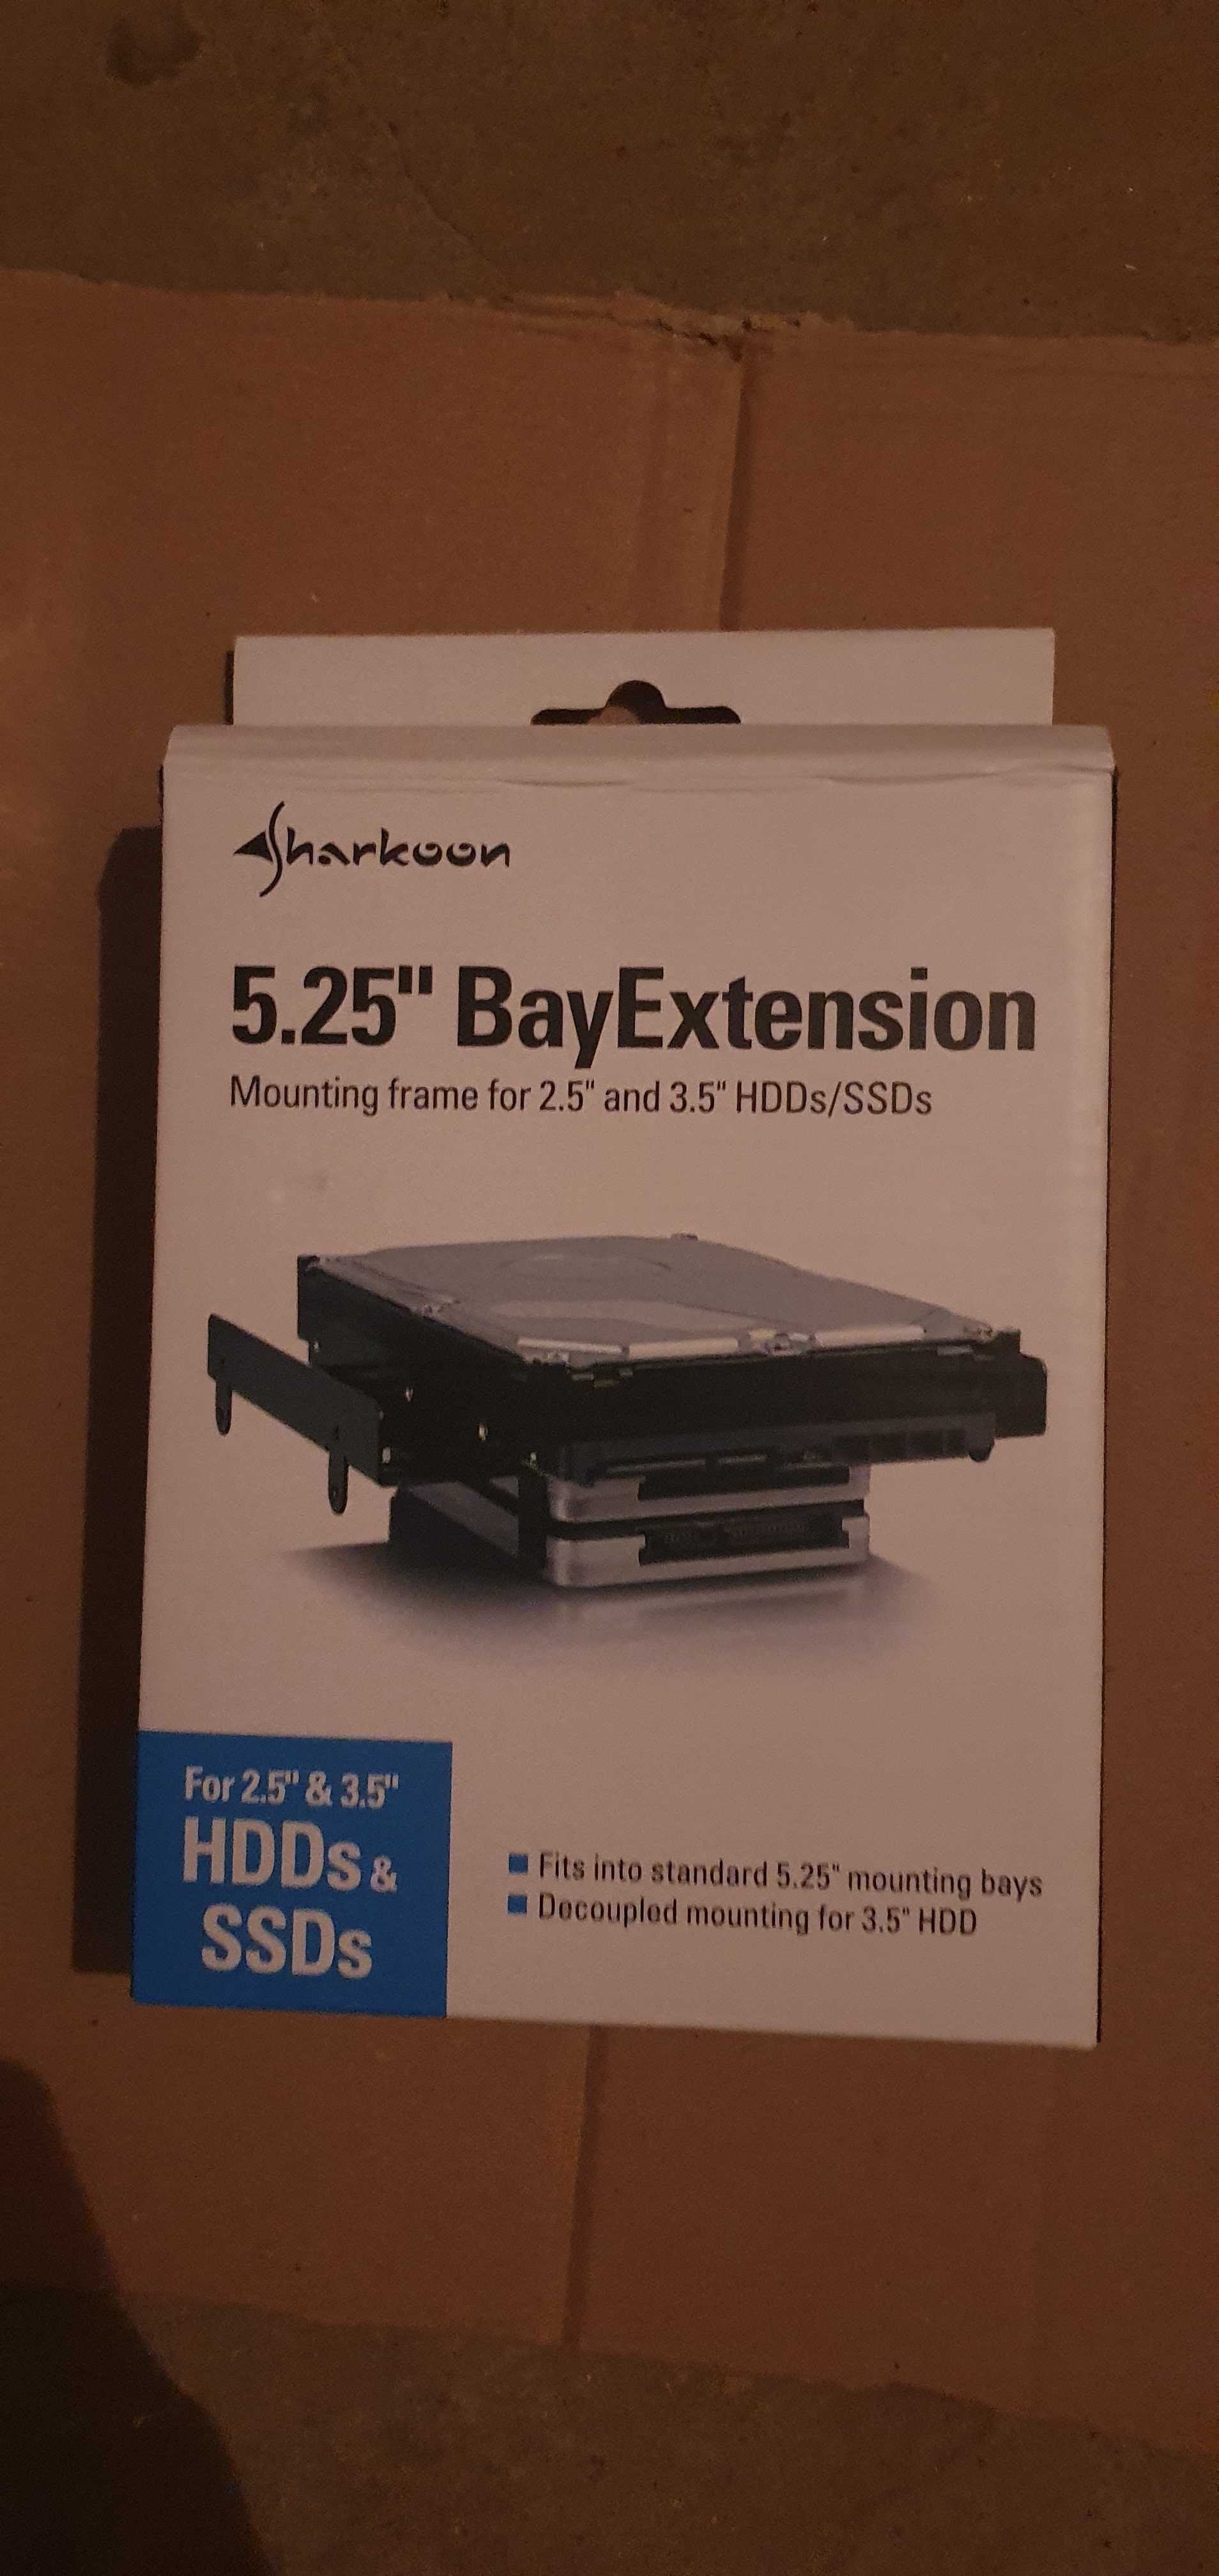 Adapter SSDs/HDDs 5.25 BayExtension Sharkoon